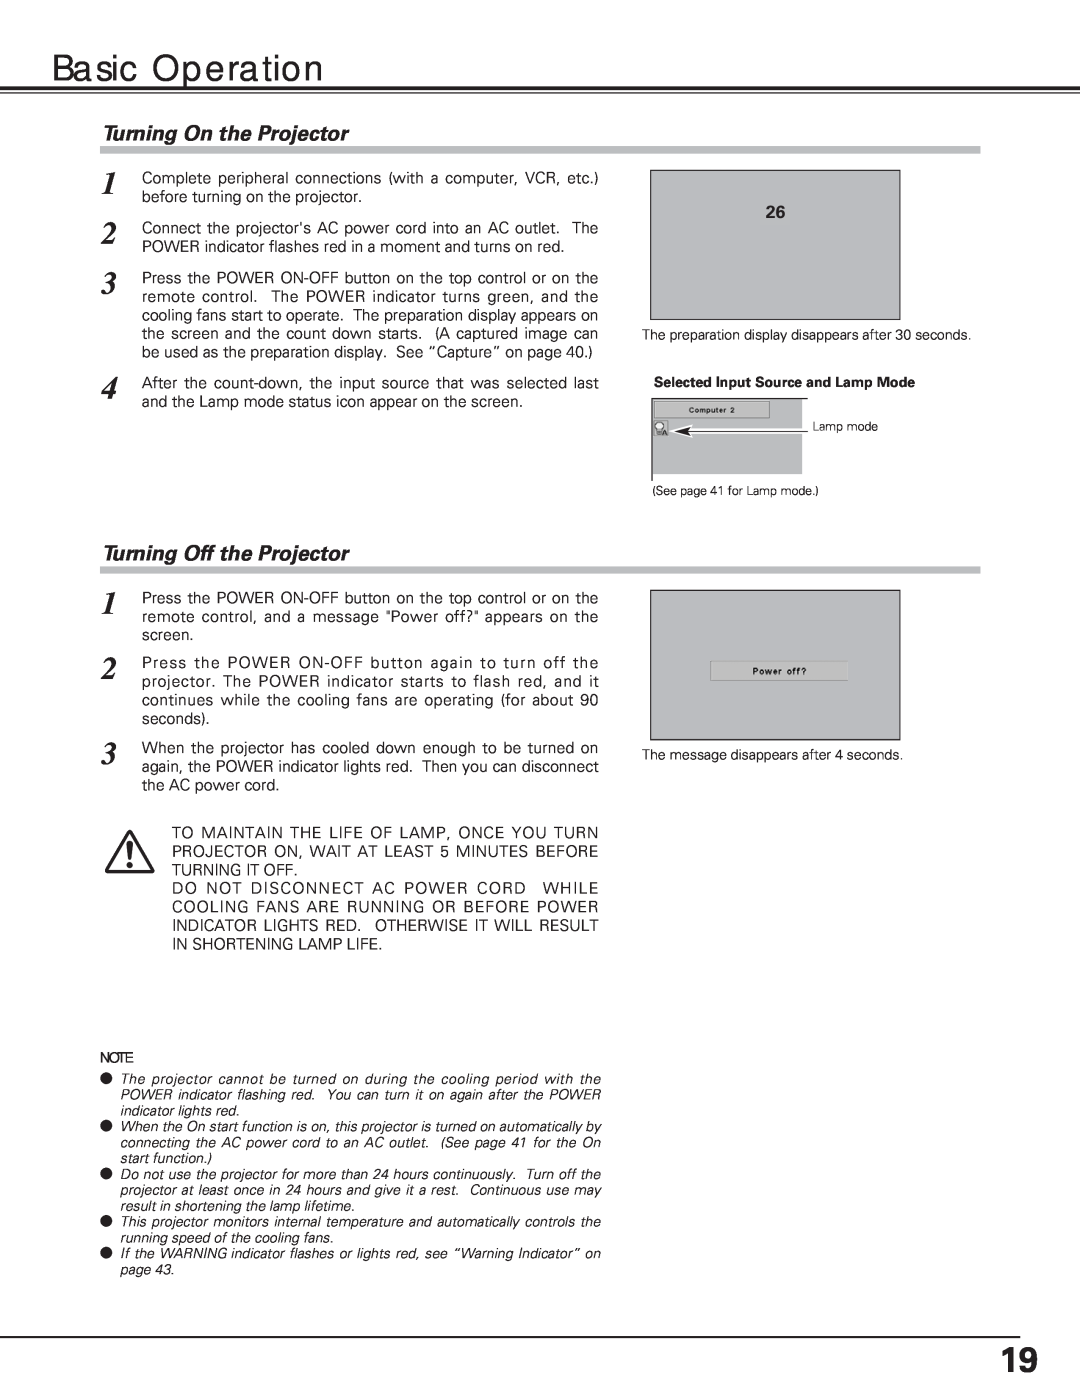 Eiki LC-XE10 instruction manual Basic Operation, Turning On the Projector, Turning Off the Projector 